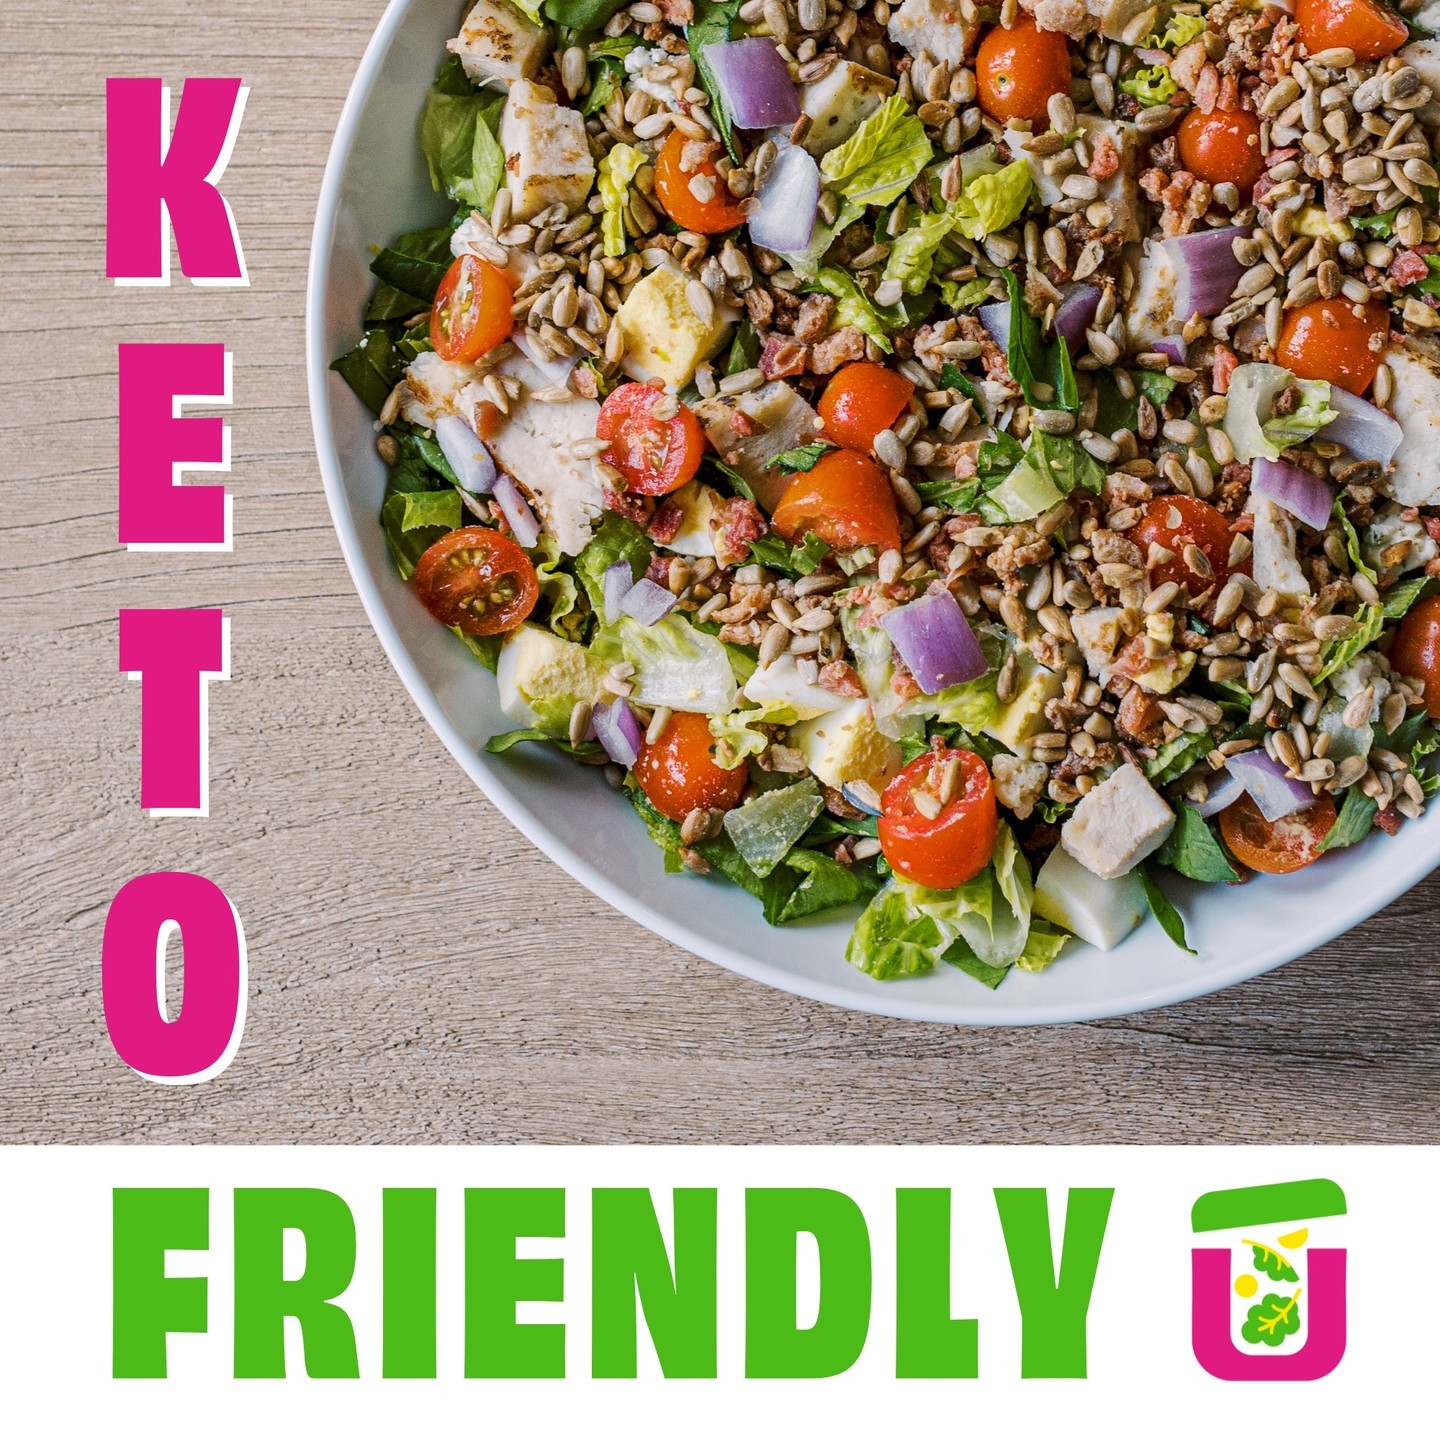 We’ve got 99 problems, but a carb ain’t one!
 
On a Keto diet? You’ll want to check out the Cobb gardencup. At only 12g of carbs, this may be the easiest Keto-friendly meal you’ve ever had👍 
 
Which Keto-status best describes you?
A) Hardcore Keto
B) Casual Keto / just starting
C) Don’t really care, gimme those carbs

#saladsanywhere #saladinacup #saladsmadeeasy #producepacked #eatintentionally #how2gardencup #gardencUPcycle #gardencuphacks #gardencup #healthymealidea #cleaneatinglife #healthyeatingrecipes #healthyfoodinspiration #easyandhealthy #healthyfoodadvice #heathychoices #eathealthybehappy #cleaneater #nourishingfoods #healthyfoodinspo #healthyfoodchoice #smartfoodchoices #plantbasedmeal #easymealprep